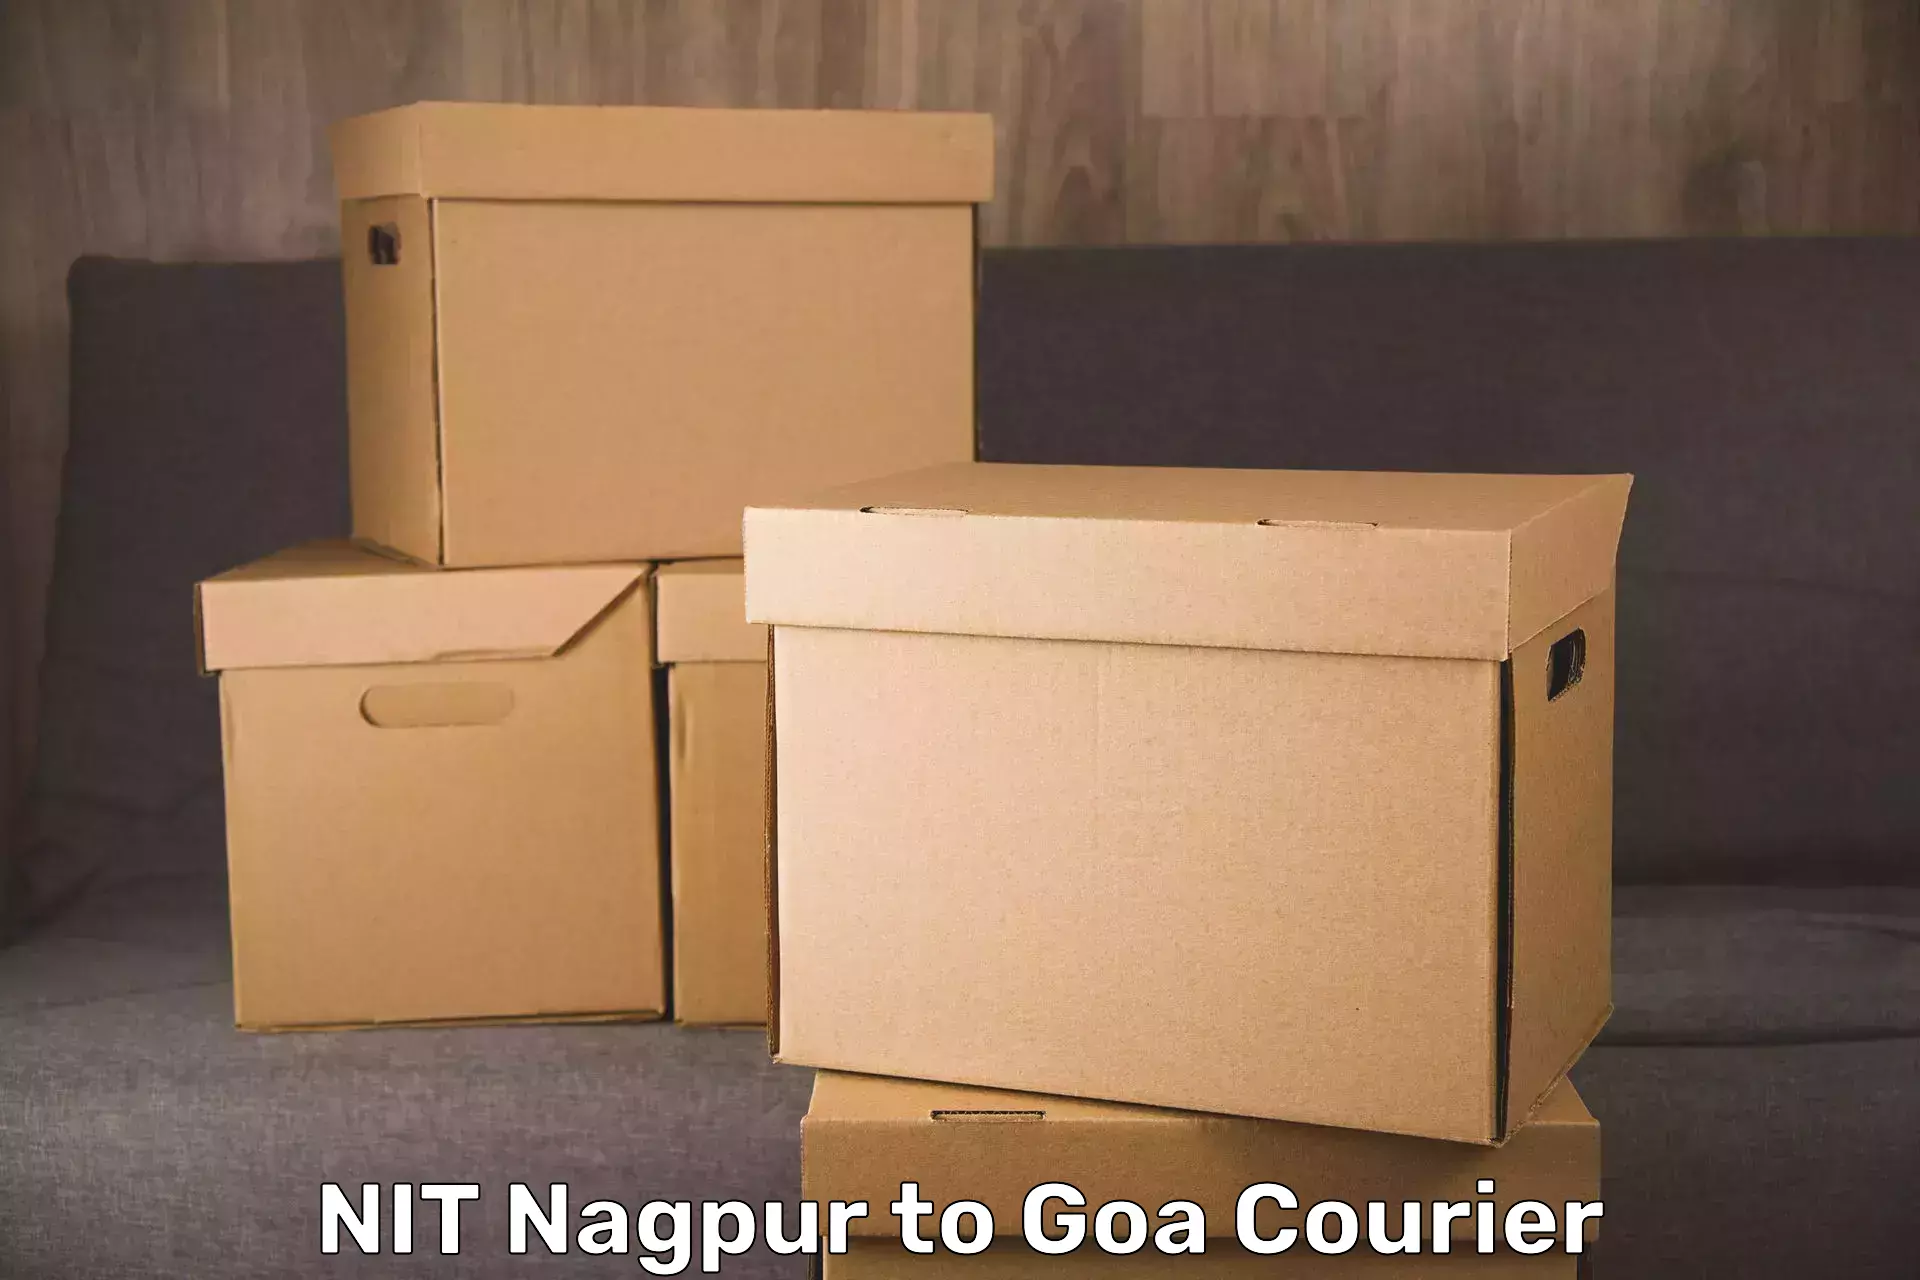 Luggage shipment specialists NIT Nagpur to South Goa